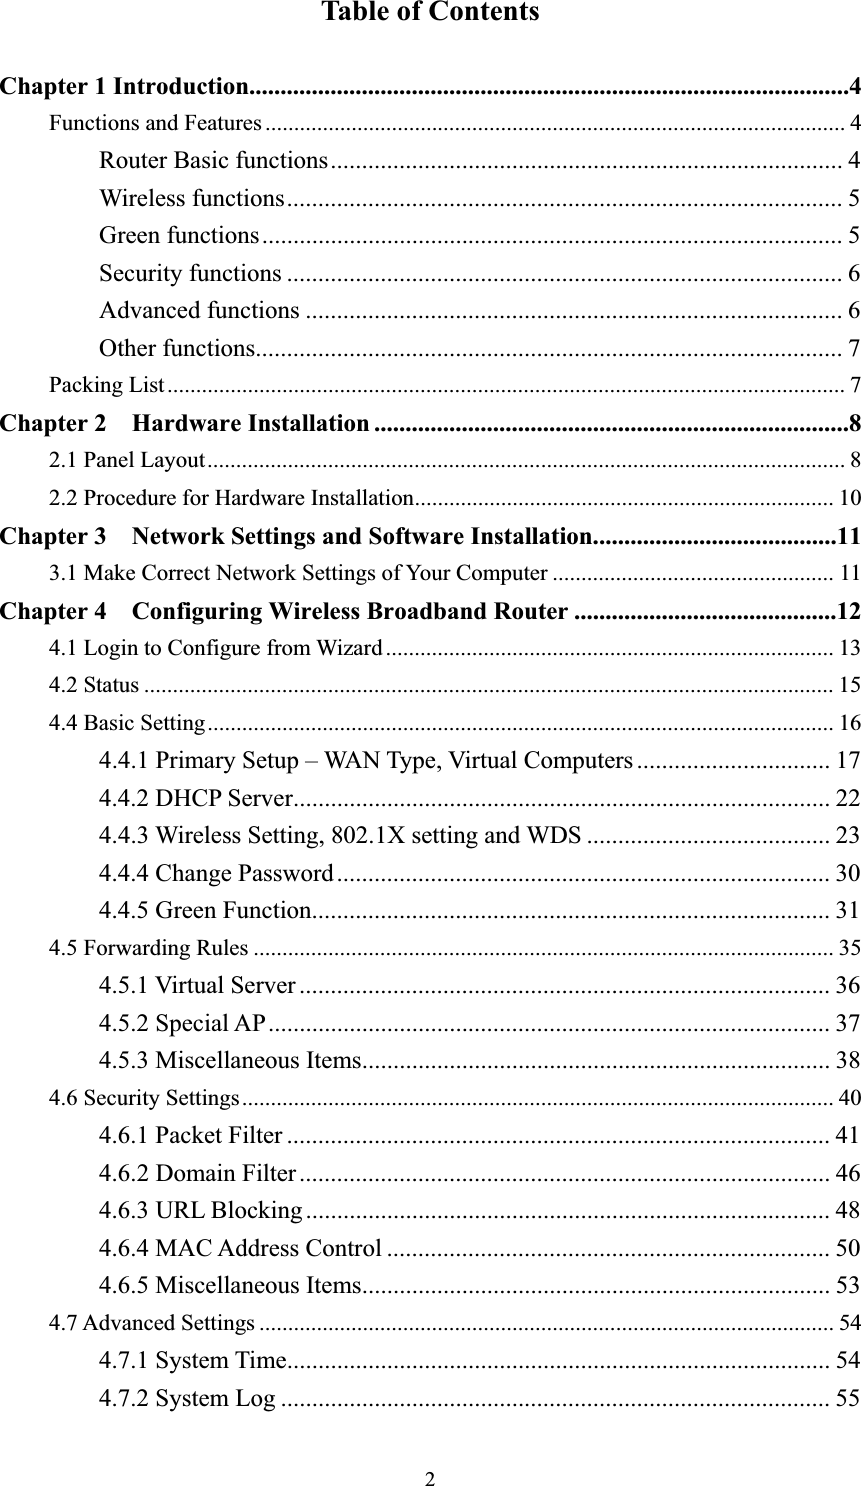 2Table of Contents Chapter 1 Introduction................................................................................................4Functions and Features ..................................................................................................... 4Router Basic functions.................................................................................. 4 Wireless functions......................................................................................... 5 Green functions............................................................................................. 5 Security functions ......................................................................................... 6 Advanced functions ...................................................................................... 6 Other functions.............................................................................................. 7 Packing List...................................................................................................................... 7Chapter 2  Hardware Installation ............................................................................82.1 Panel Layout............................................................................................................... 82.2 Procedure for Hardware Installation......................................................................... 10Chapter 3    Network Settings and Software Installation.......................................113.1 Make Correct Network Settings of Your Computer ................................................. 11Chapter 4    Configuring Wireless Broadband Router ..........................................124.1 Login to Configure from Wizard .............................................................................. 134.2 Status ........................................................................................................................ 154.4 Basic Setting............................................................................................................. 164.4.1 Primary Setup – WAN Type, Virtual Computers............................... 17 4.4.2 DHCP Server...................................................................................... 22 4.4.3 Wireless Setting, 802.1X setting and WDS ....................................... 23 4.4.4 Change Password............................................................................... 30 4.4.5 Green Function................................................................................... 31 4.5 Forwarding Rules ..................................................................................................... 354.5.1 Virtual Server ..................................................................................... 36 4.5.2 Special AP.......................................................................................... 37 4.5.3 Miscellaneous Items........................................................................... 38 4.6 Security Settings....................................................................................................... 404.6.1 Packet Filter ....................................................................................... 41 4.6.2 Domain Filter..................................................................................... 46 4.6.3 URL Blocking.................................................................................... 48 4.6.4 MAC Address Control ....................................................................... 50 4.6.5 Miscellaneous Items........................................................................... 53 4.7 Advanced Settings .................................................................................................... 544.7.1 System Time....................................................................................... 54 4.7.2 System Log ........................................................................................ 55 